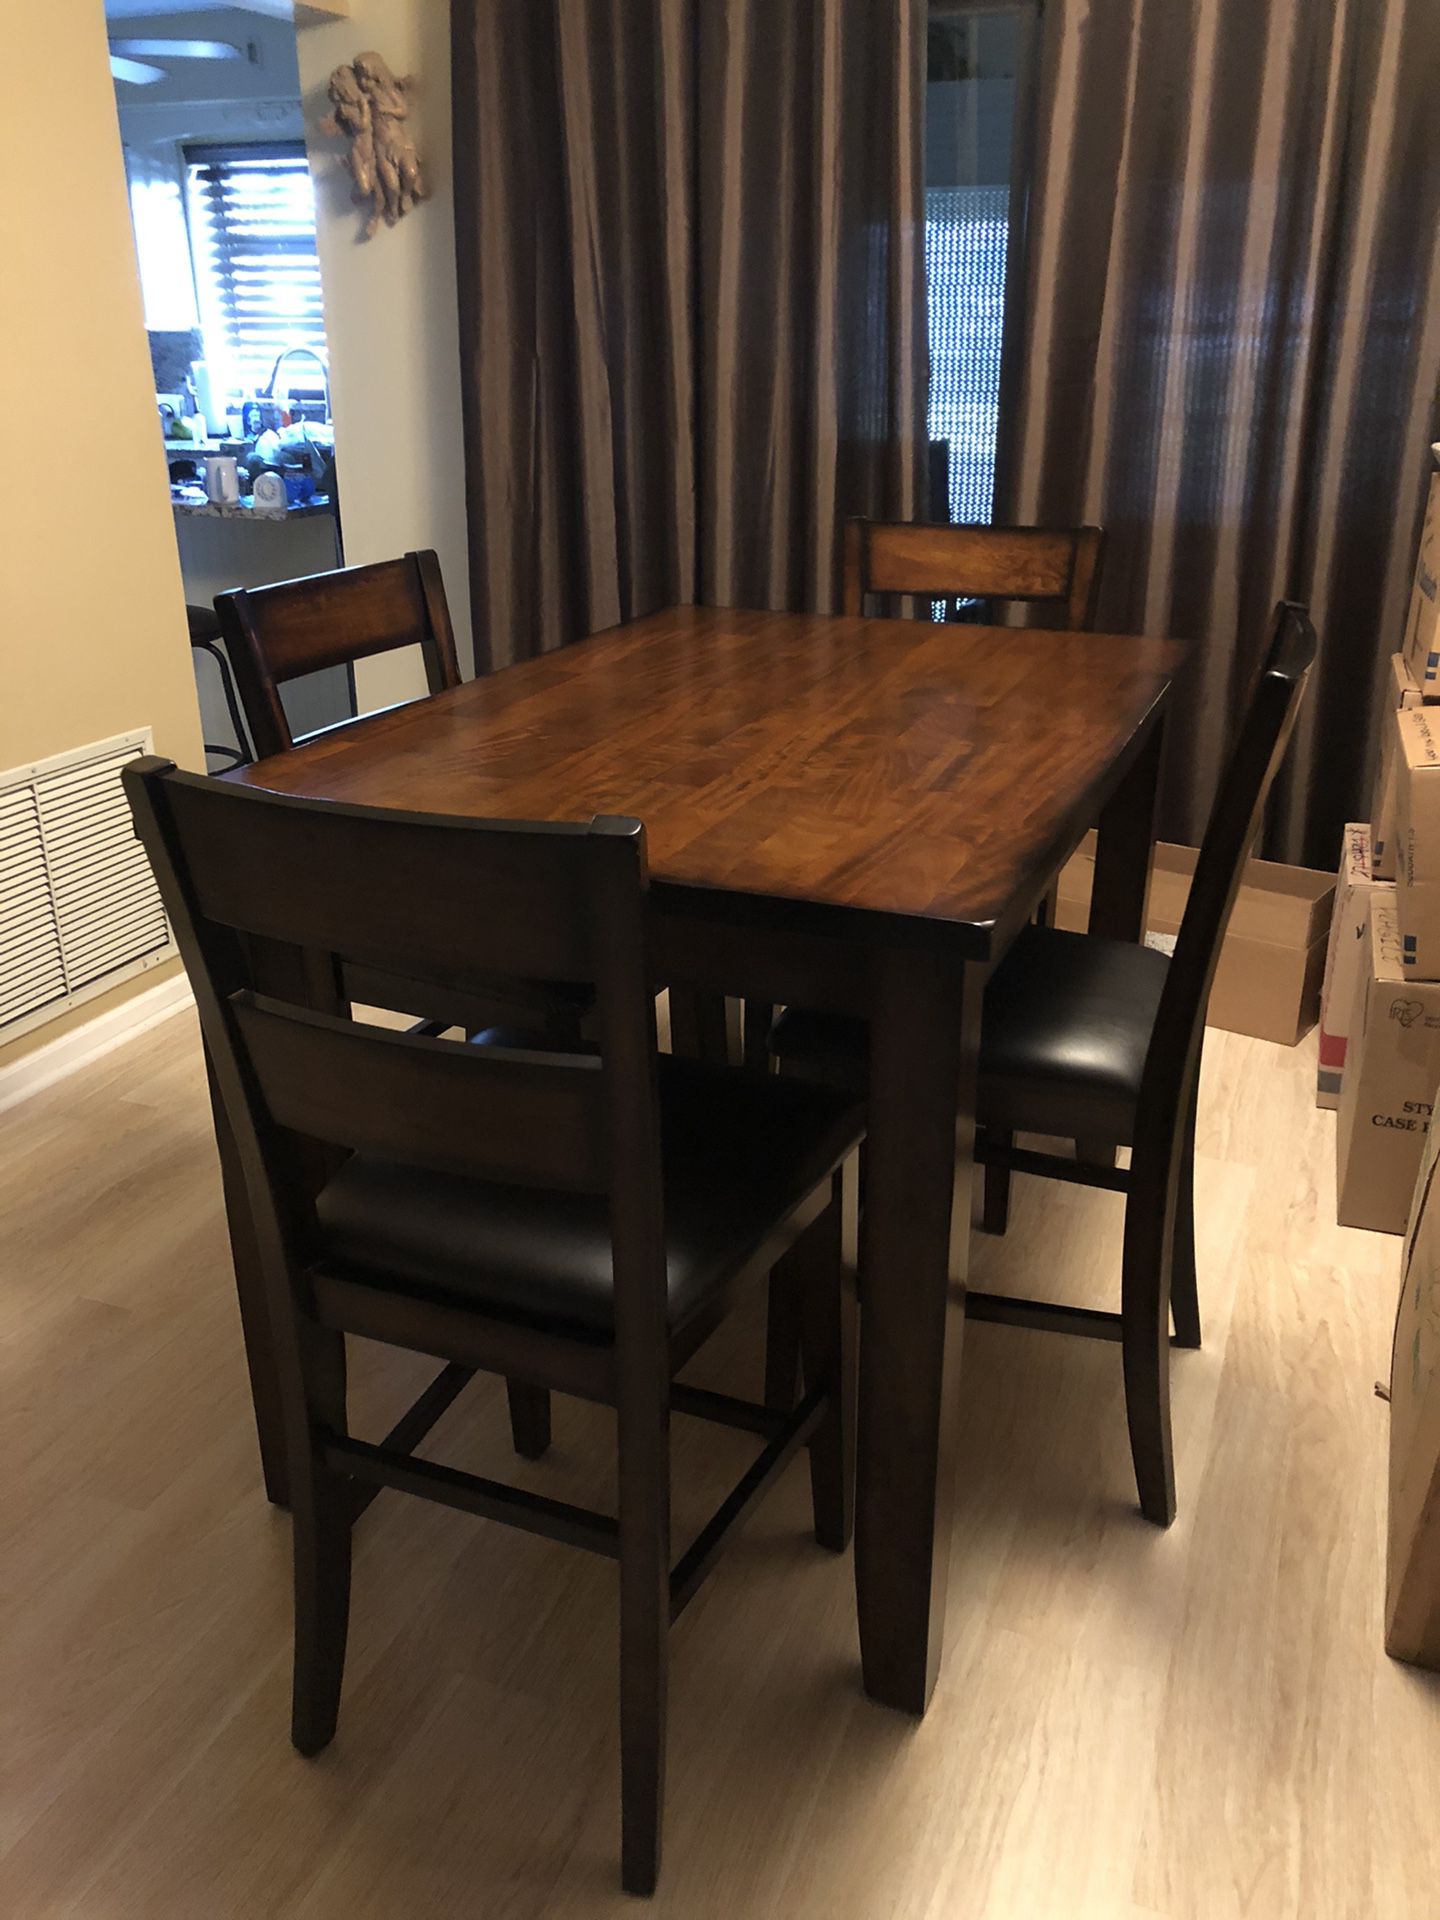 Wood hightop table and chairs